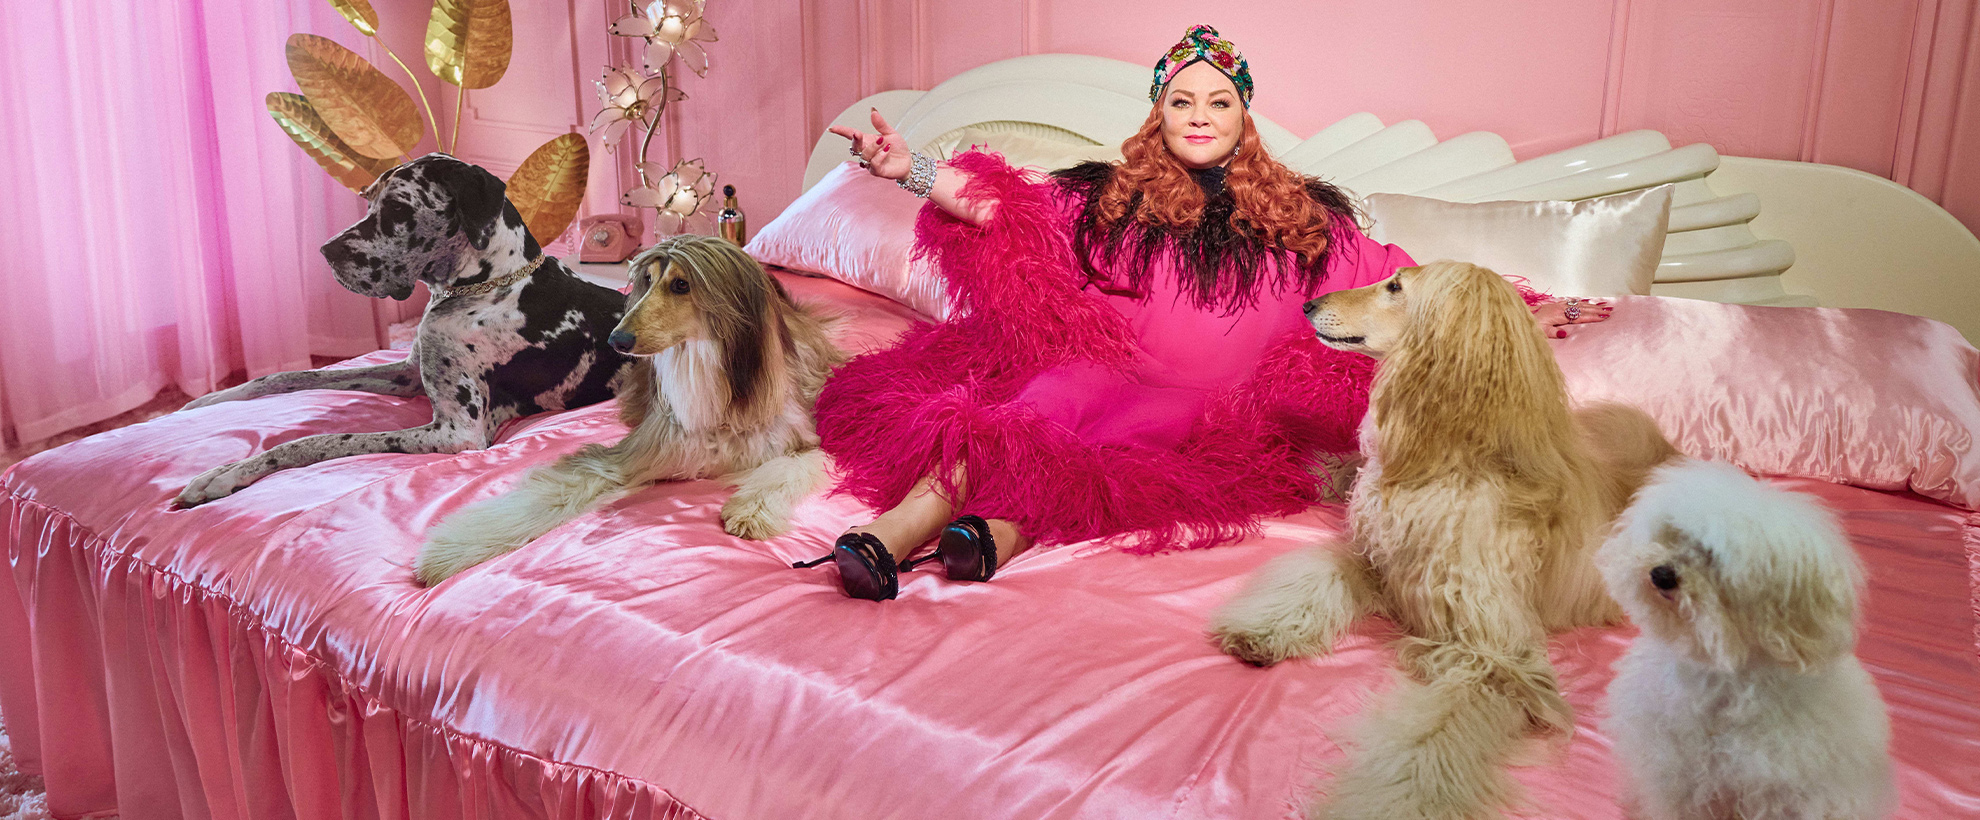 Melissa McCarthy sits on a pink satin bed, wearing a flamboyant pink robe, surrounded by different dogs